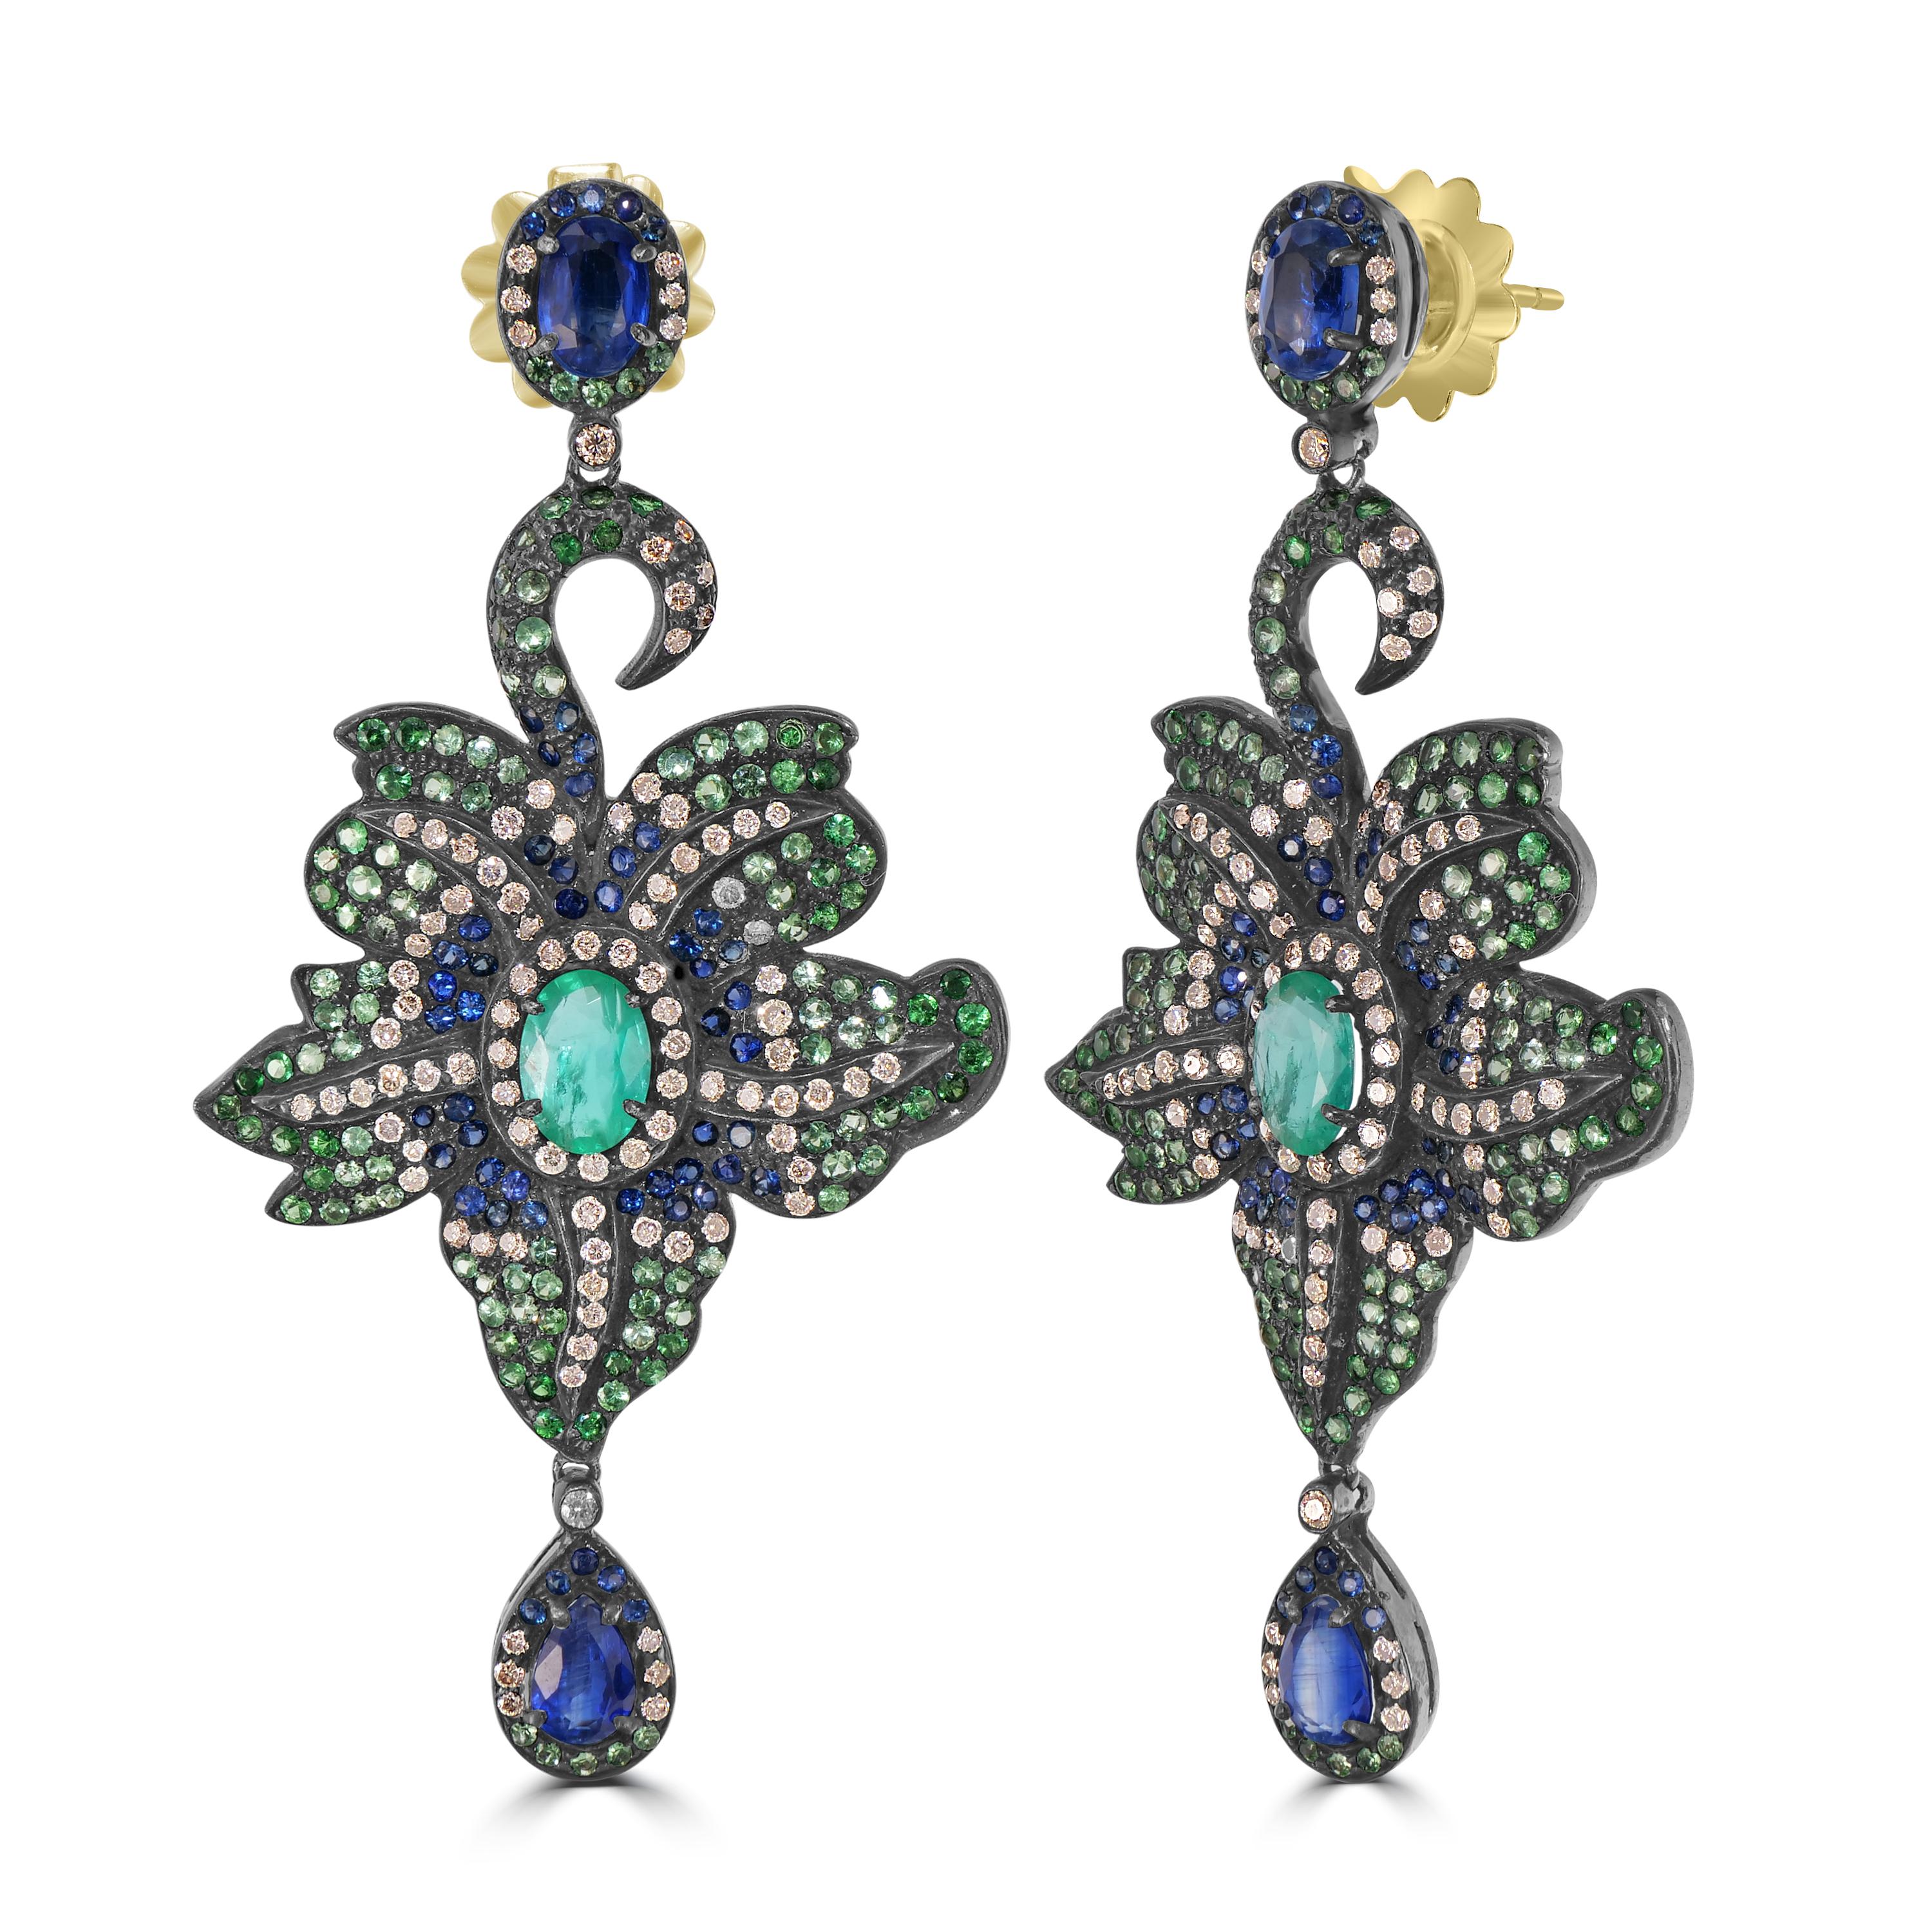 Behold the resplendent Victorian 8.75 Cttw. Sapphire, Emerald, Tsavorite, Kyanite, and Diamond Dangle Earrings—a dazzling symphony of colors and craftsmanship.

The surmount of these earrings features an oval kyanite, embraced by a spectacular halo